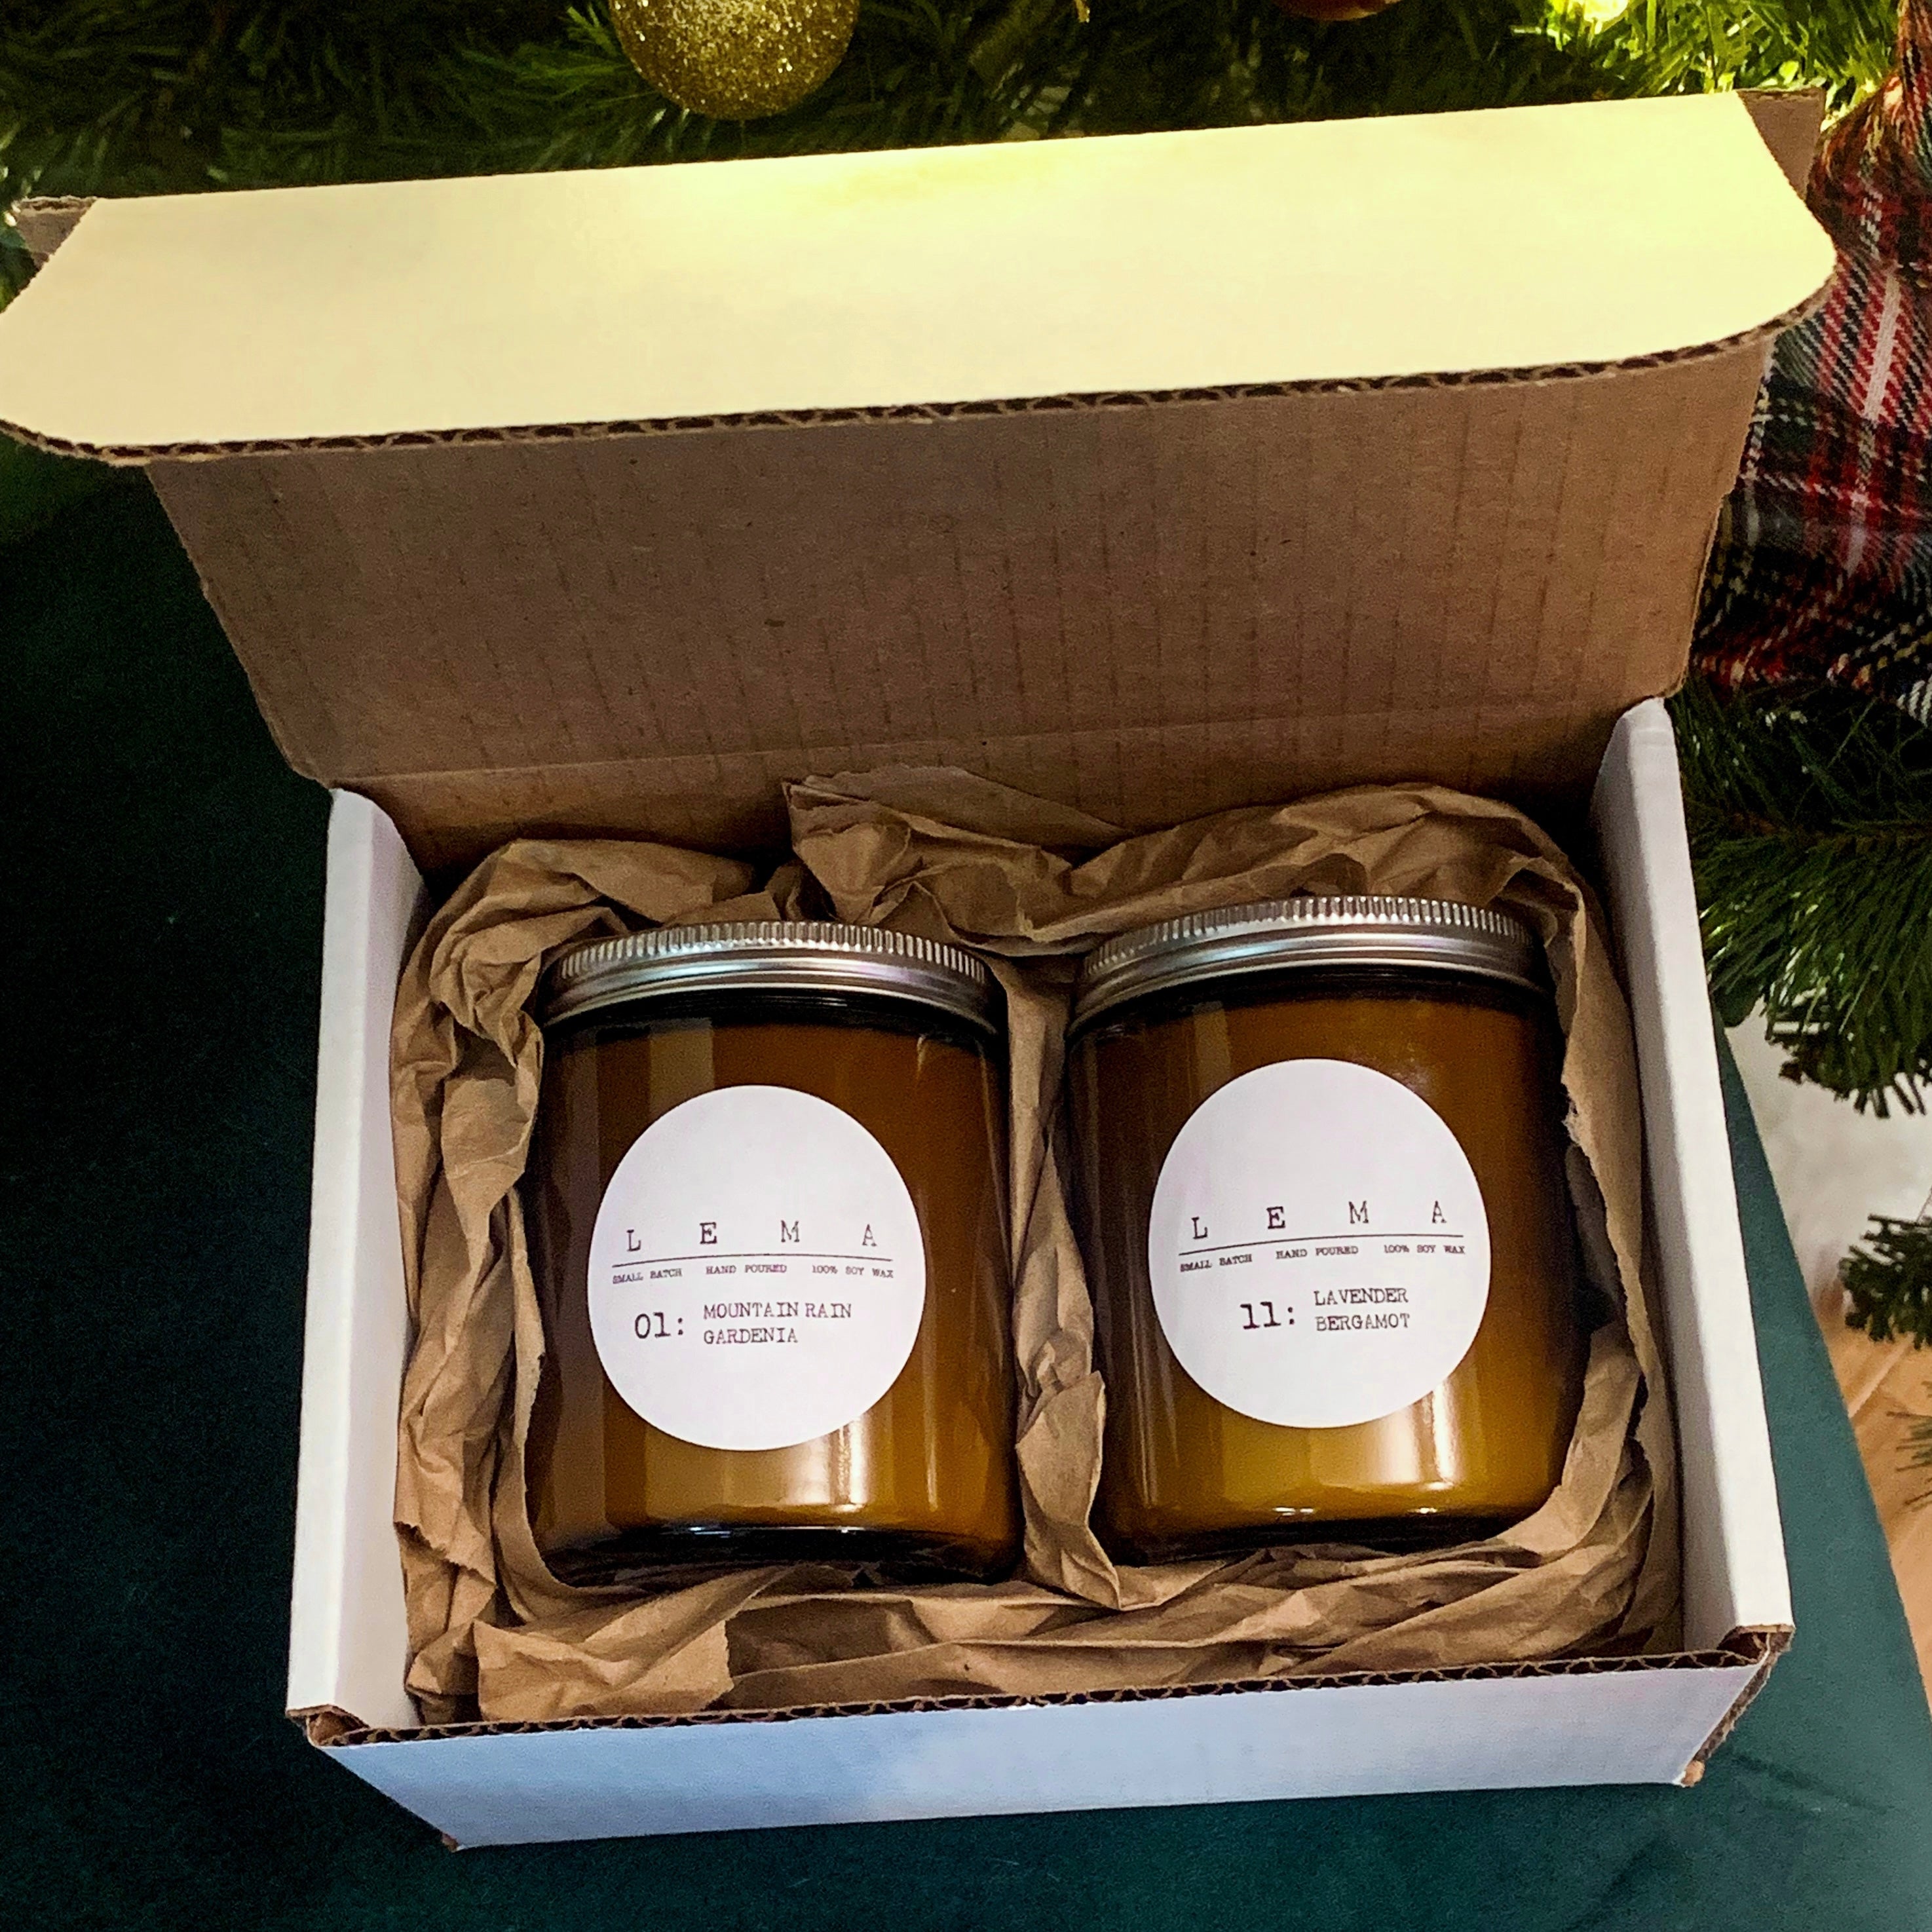 Soy Candle Gift Box With Honeybee Match Bottle - Waxhaw Candle Co.